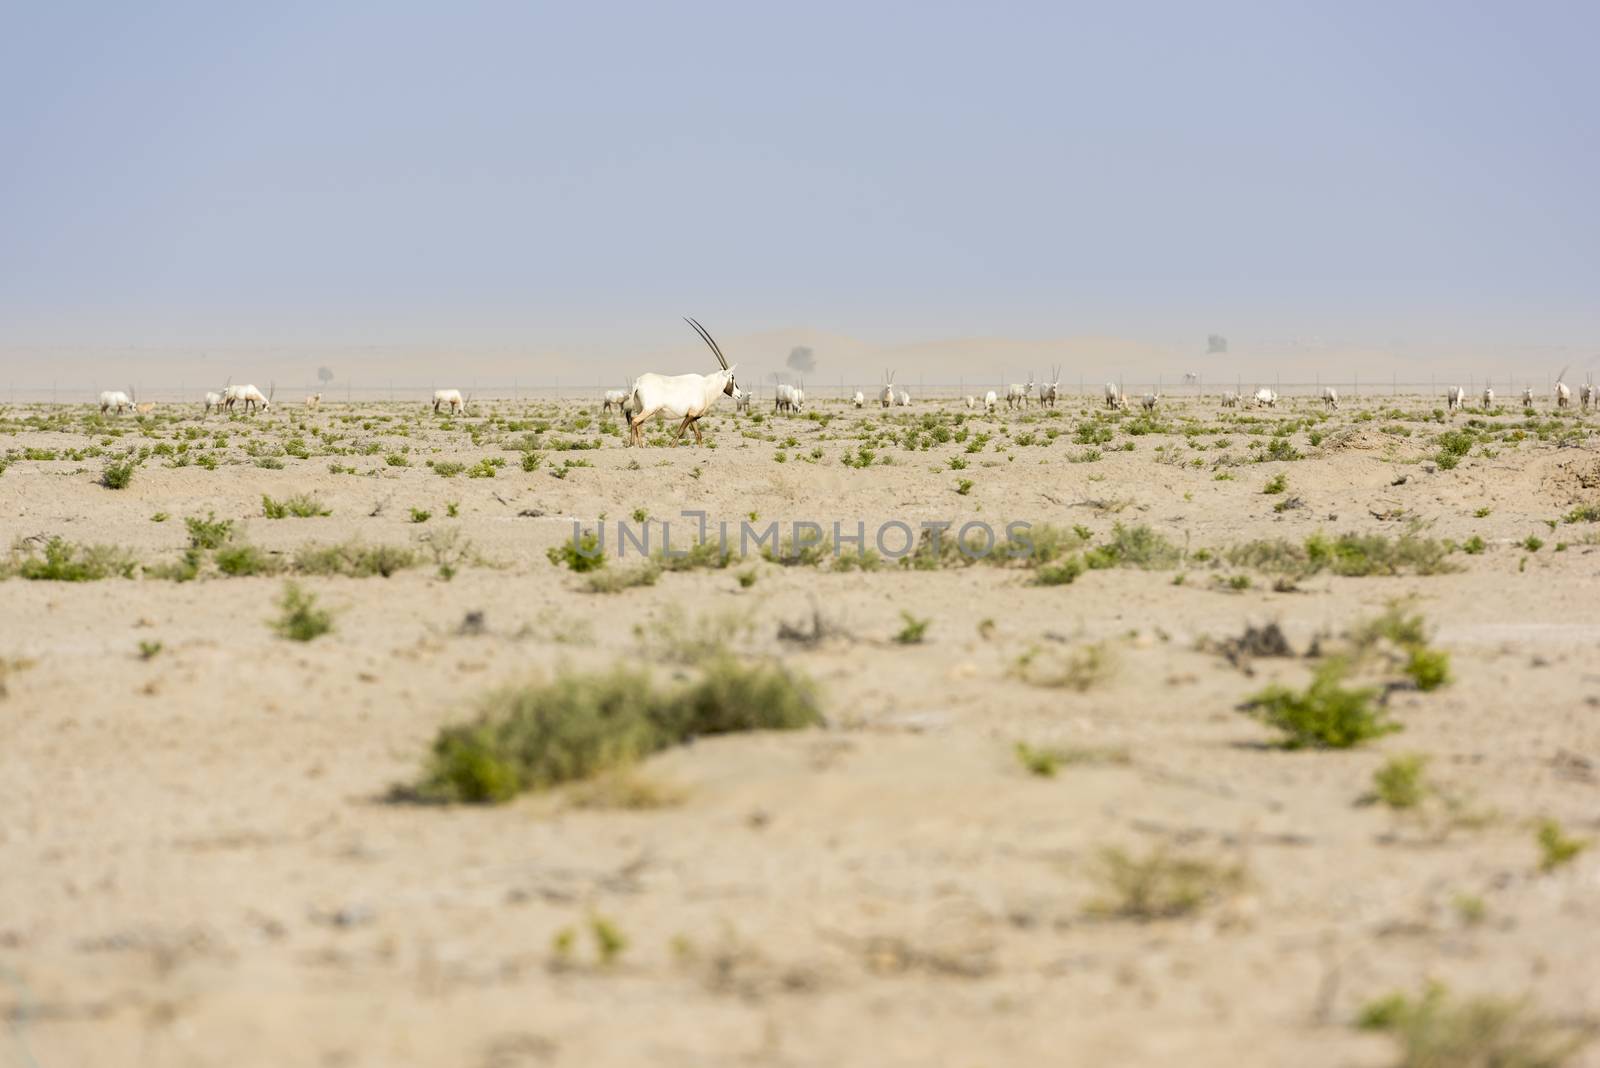 Group of Arabian oryx in a park near the Dubai bycicle track in the desert.